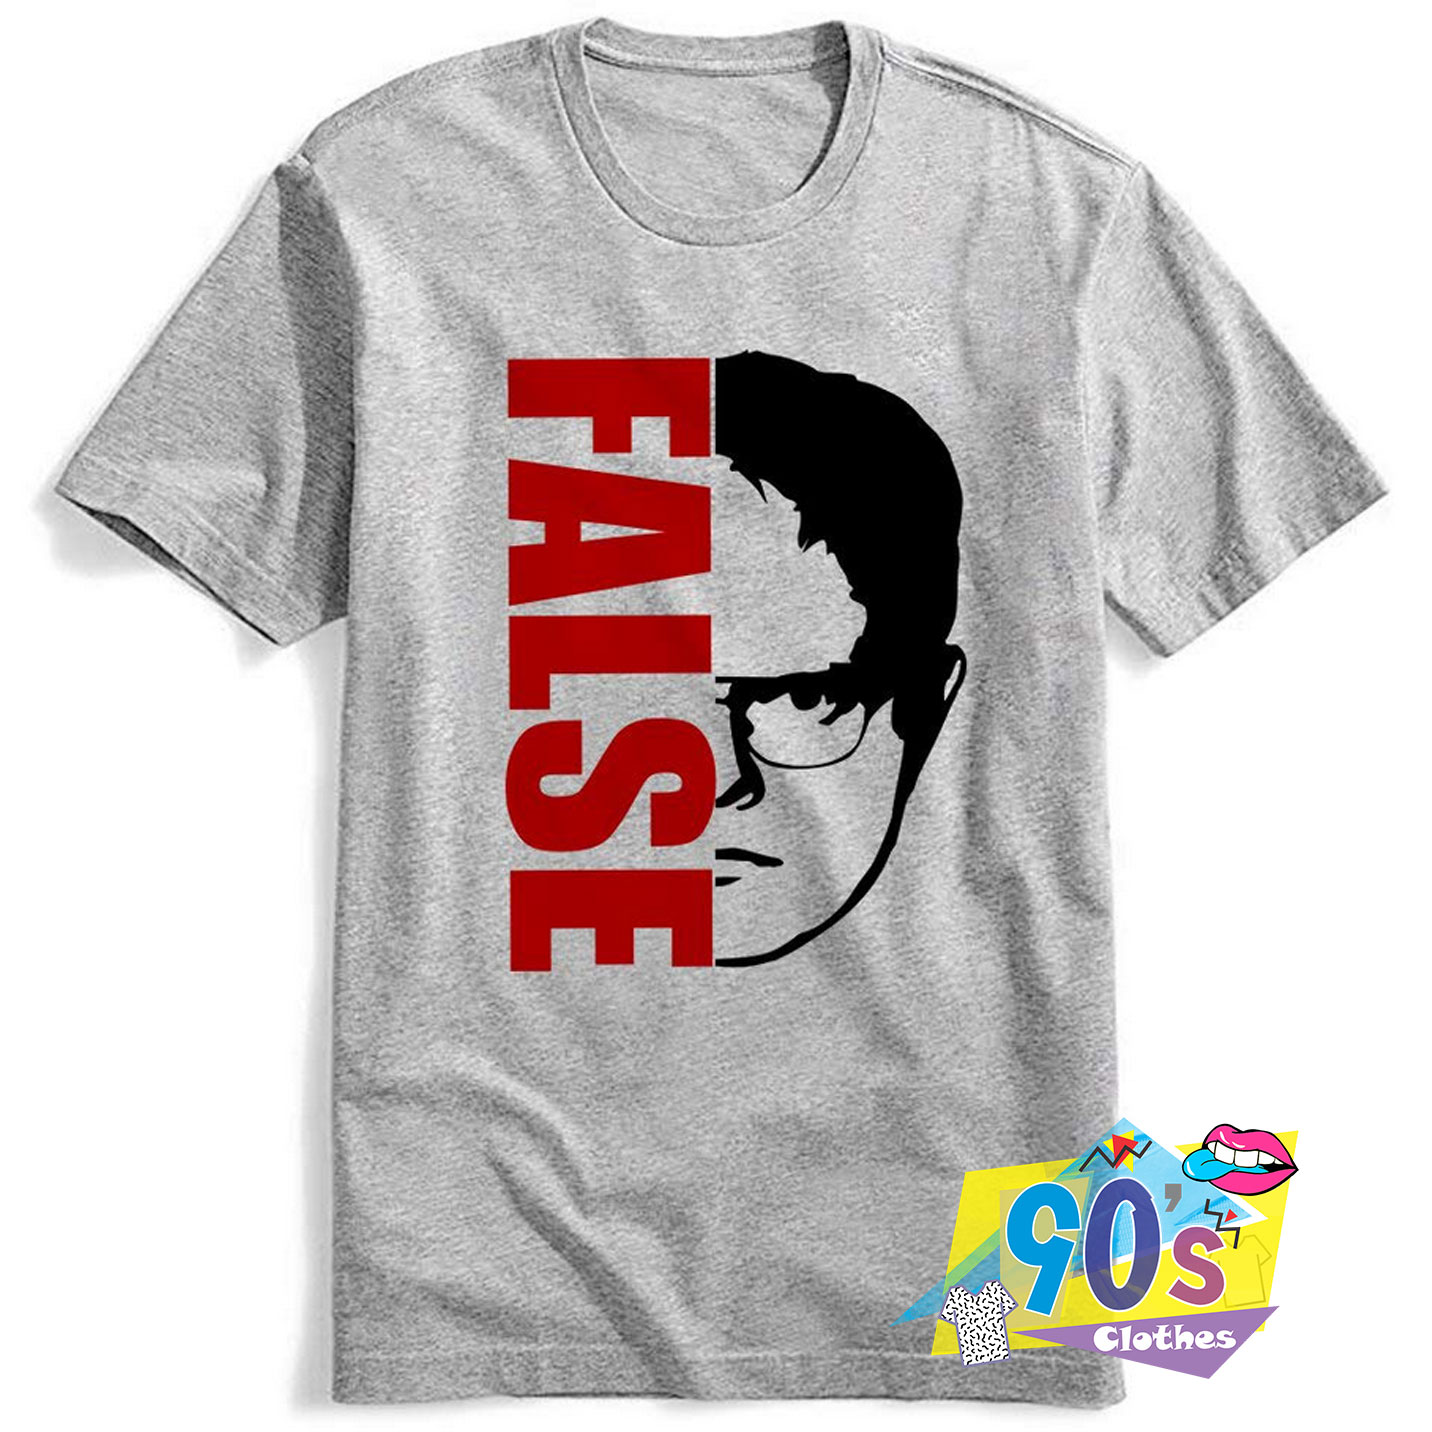 Buy > the office t shirts > in stock